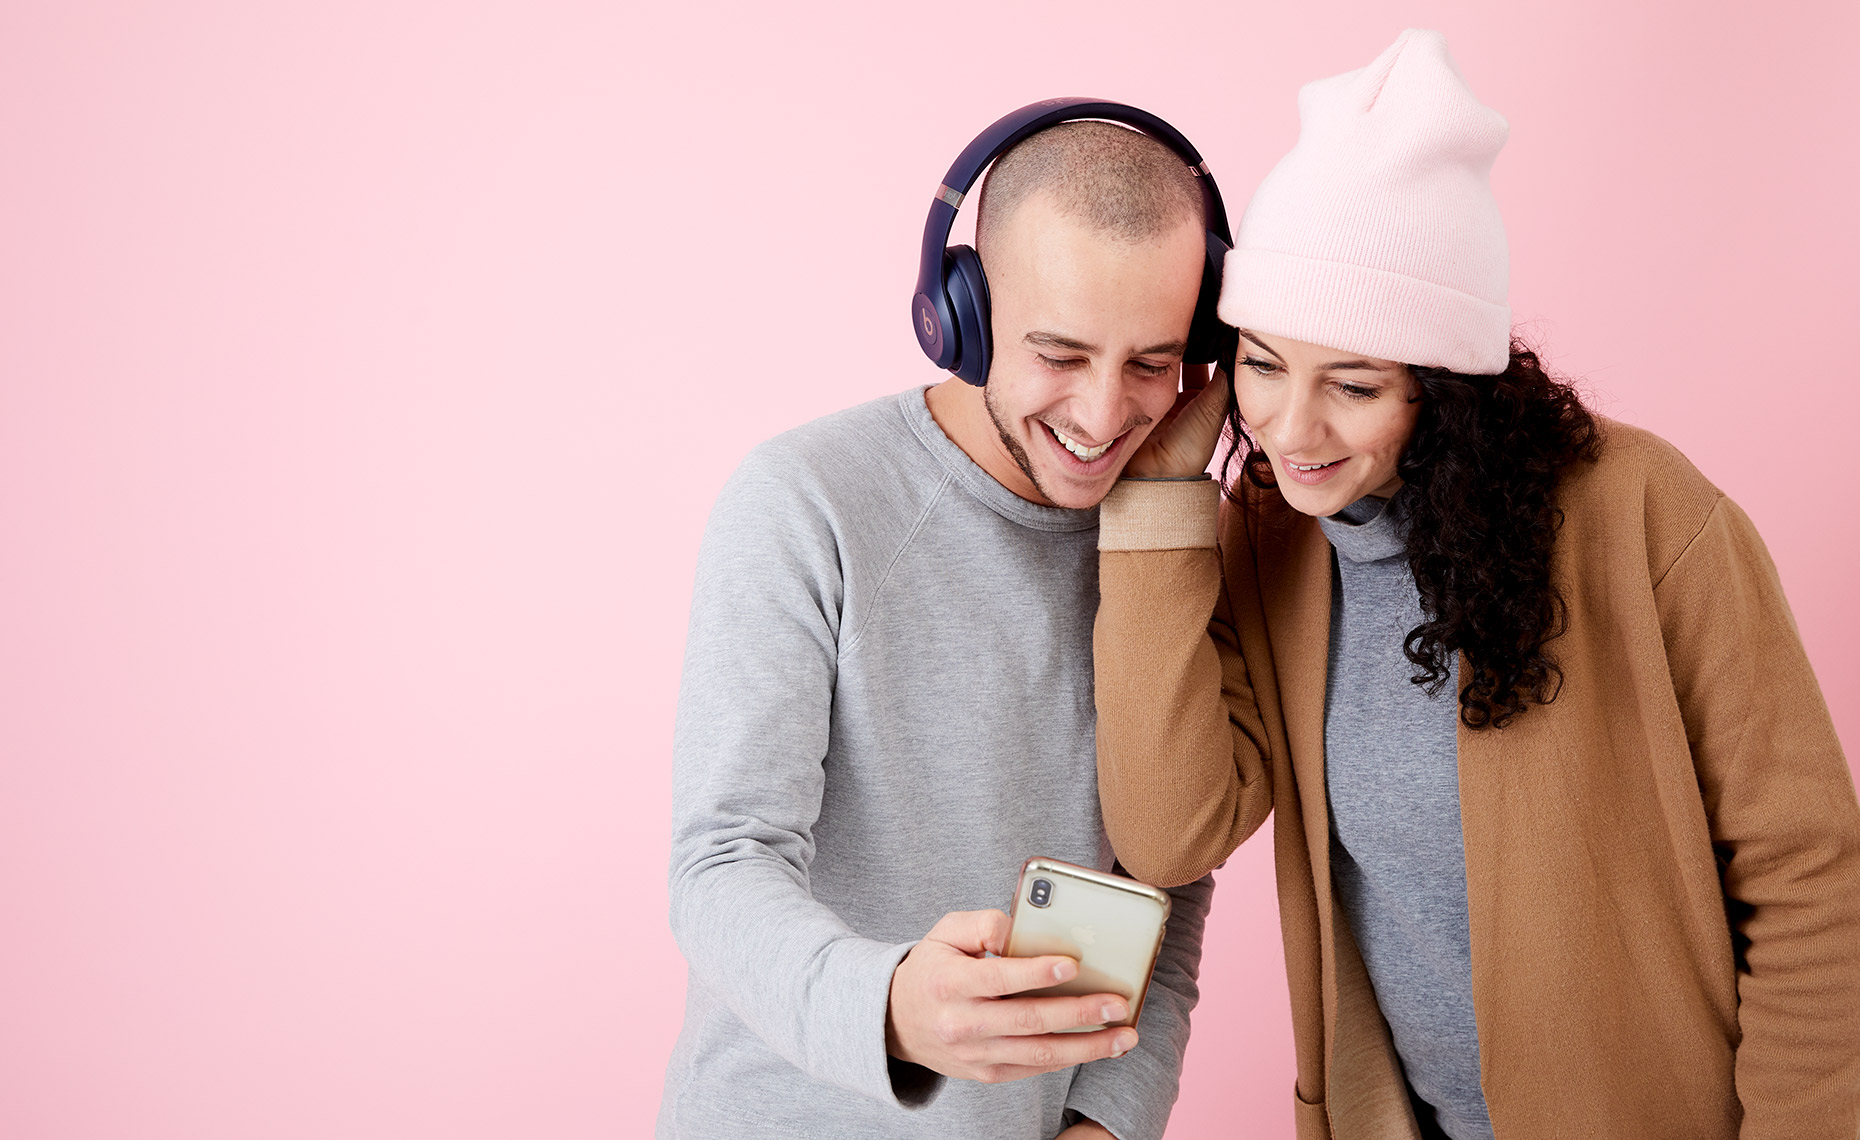 Two young attractive friends leaning in to look at a smartphone screen together, sharing headphones. Photographed against a bright pink background in a studio in New York.